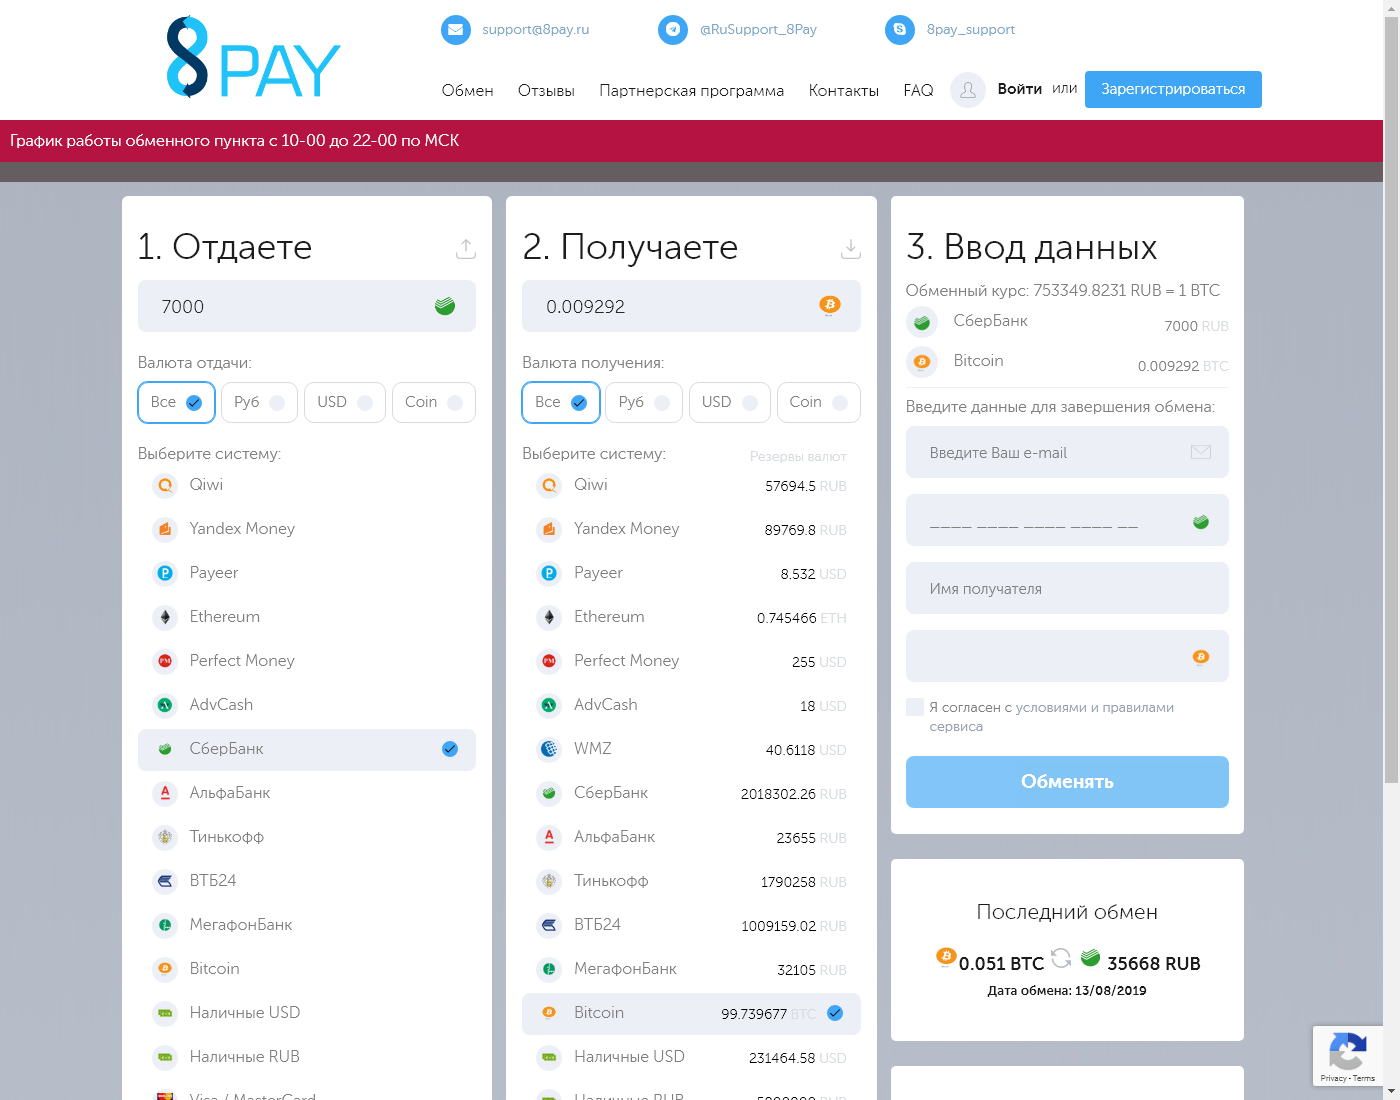 8pay user interface: the home page in English